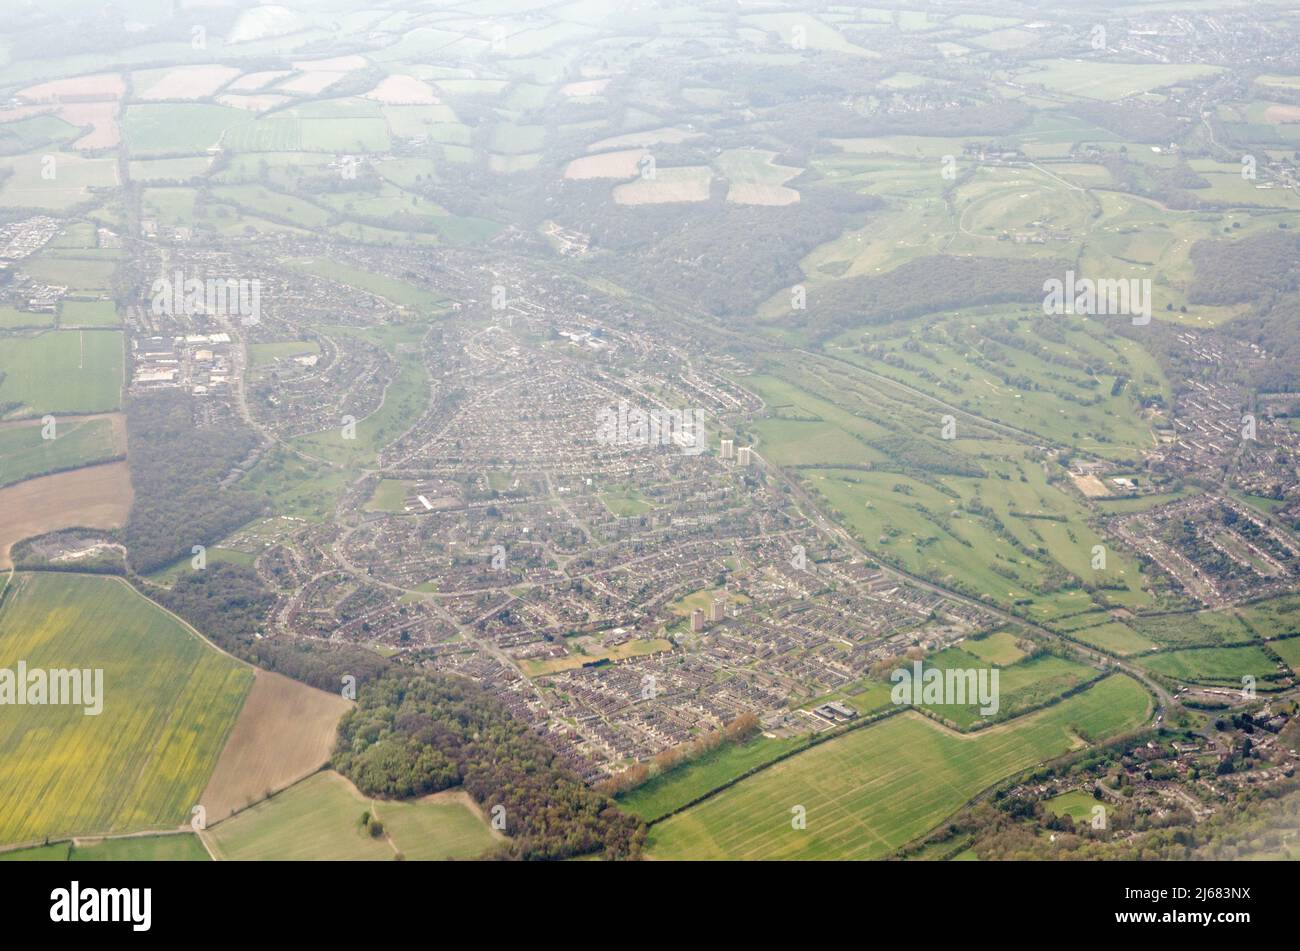 Aerial view looking south over the town of New Addington in the London Borough of Croydon with the Addington Court Golf Course to the right hand side Stock Photo